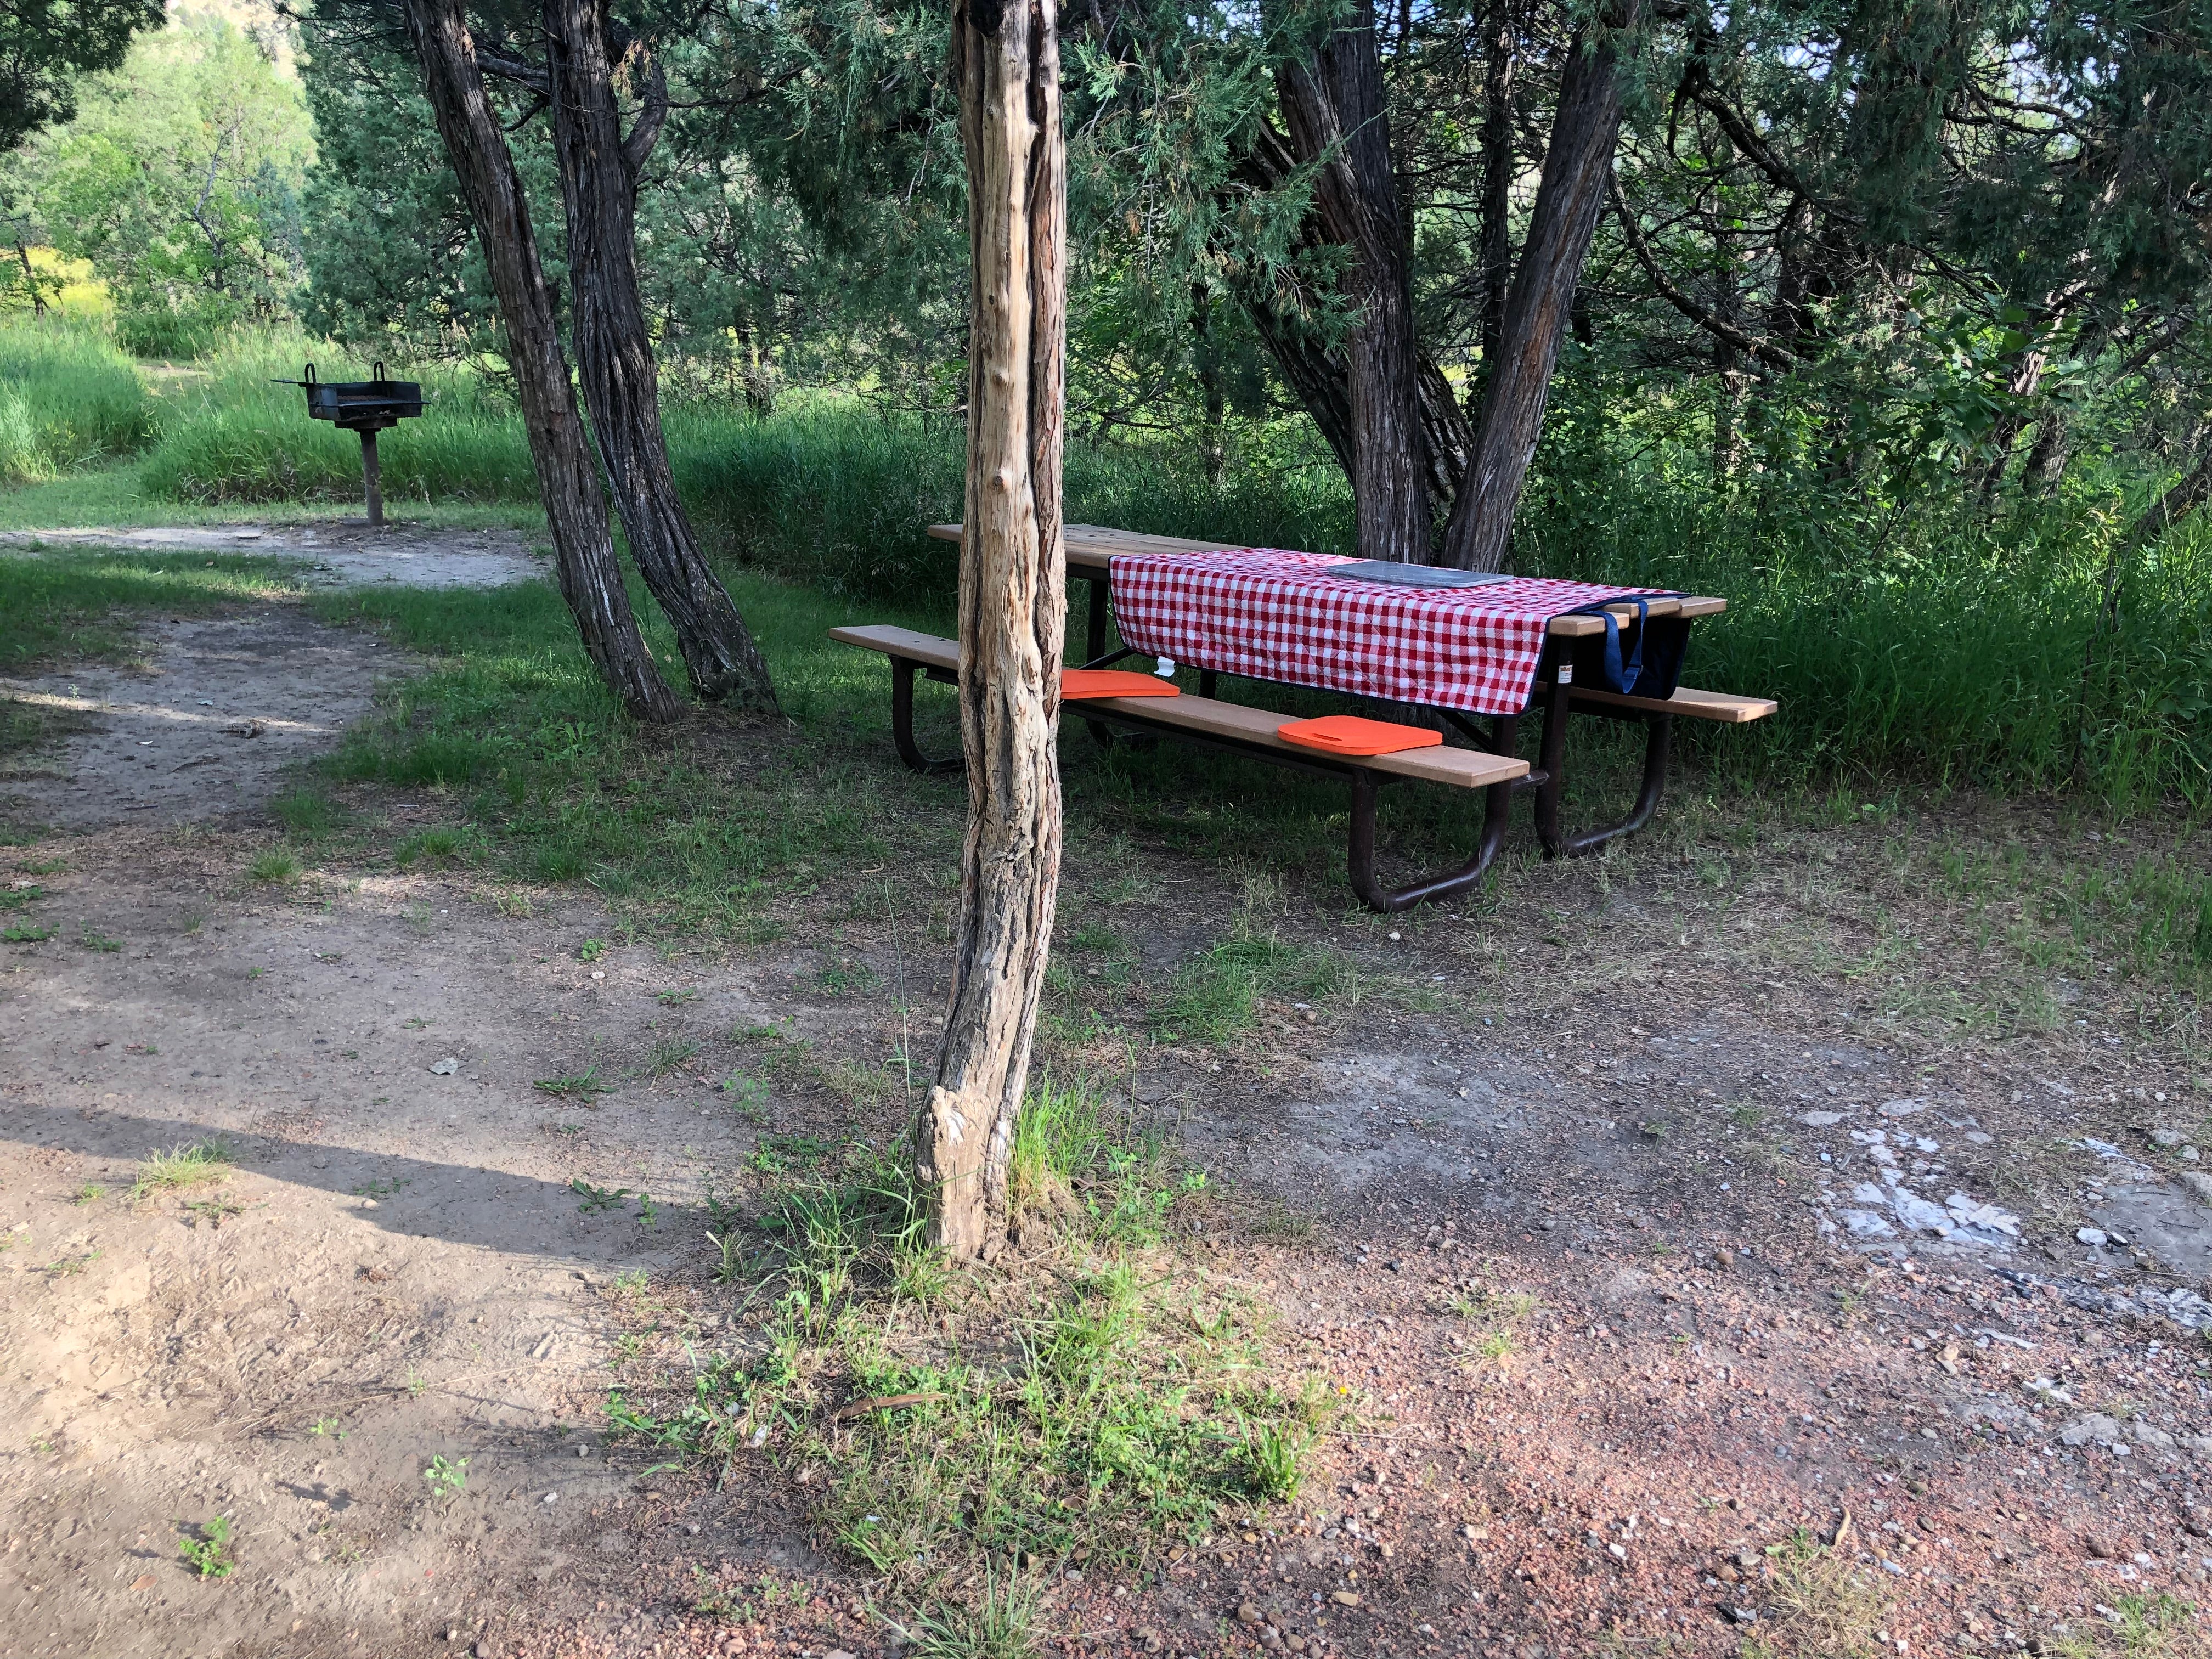 Picnic table pushed up against the trees to take advantage of shade